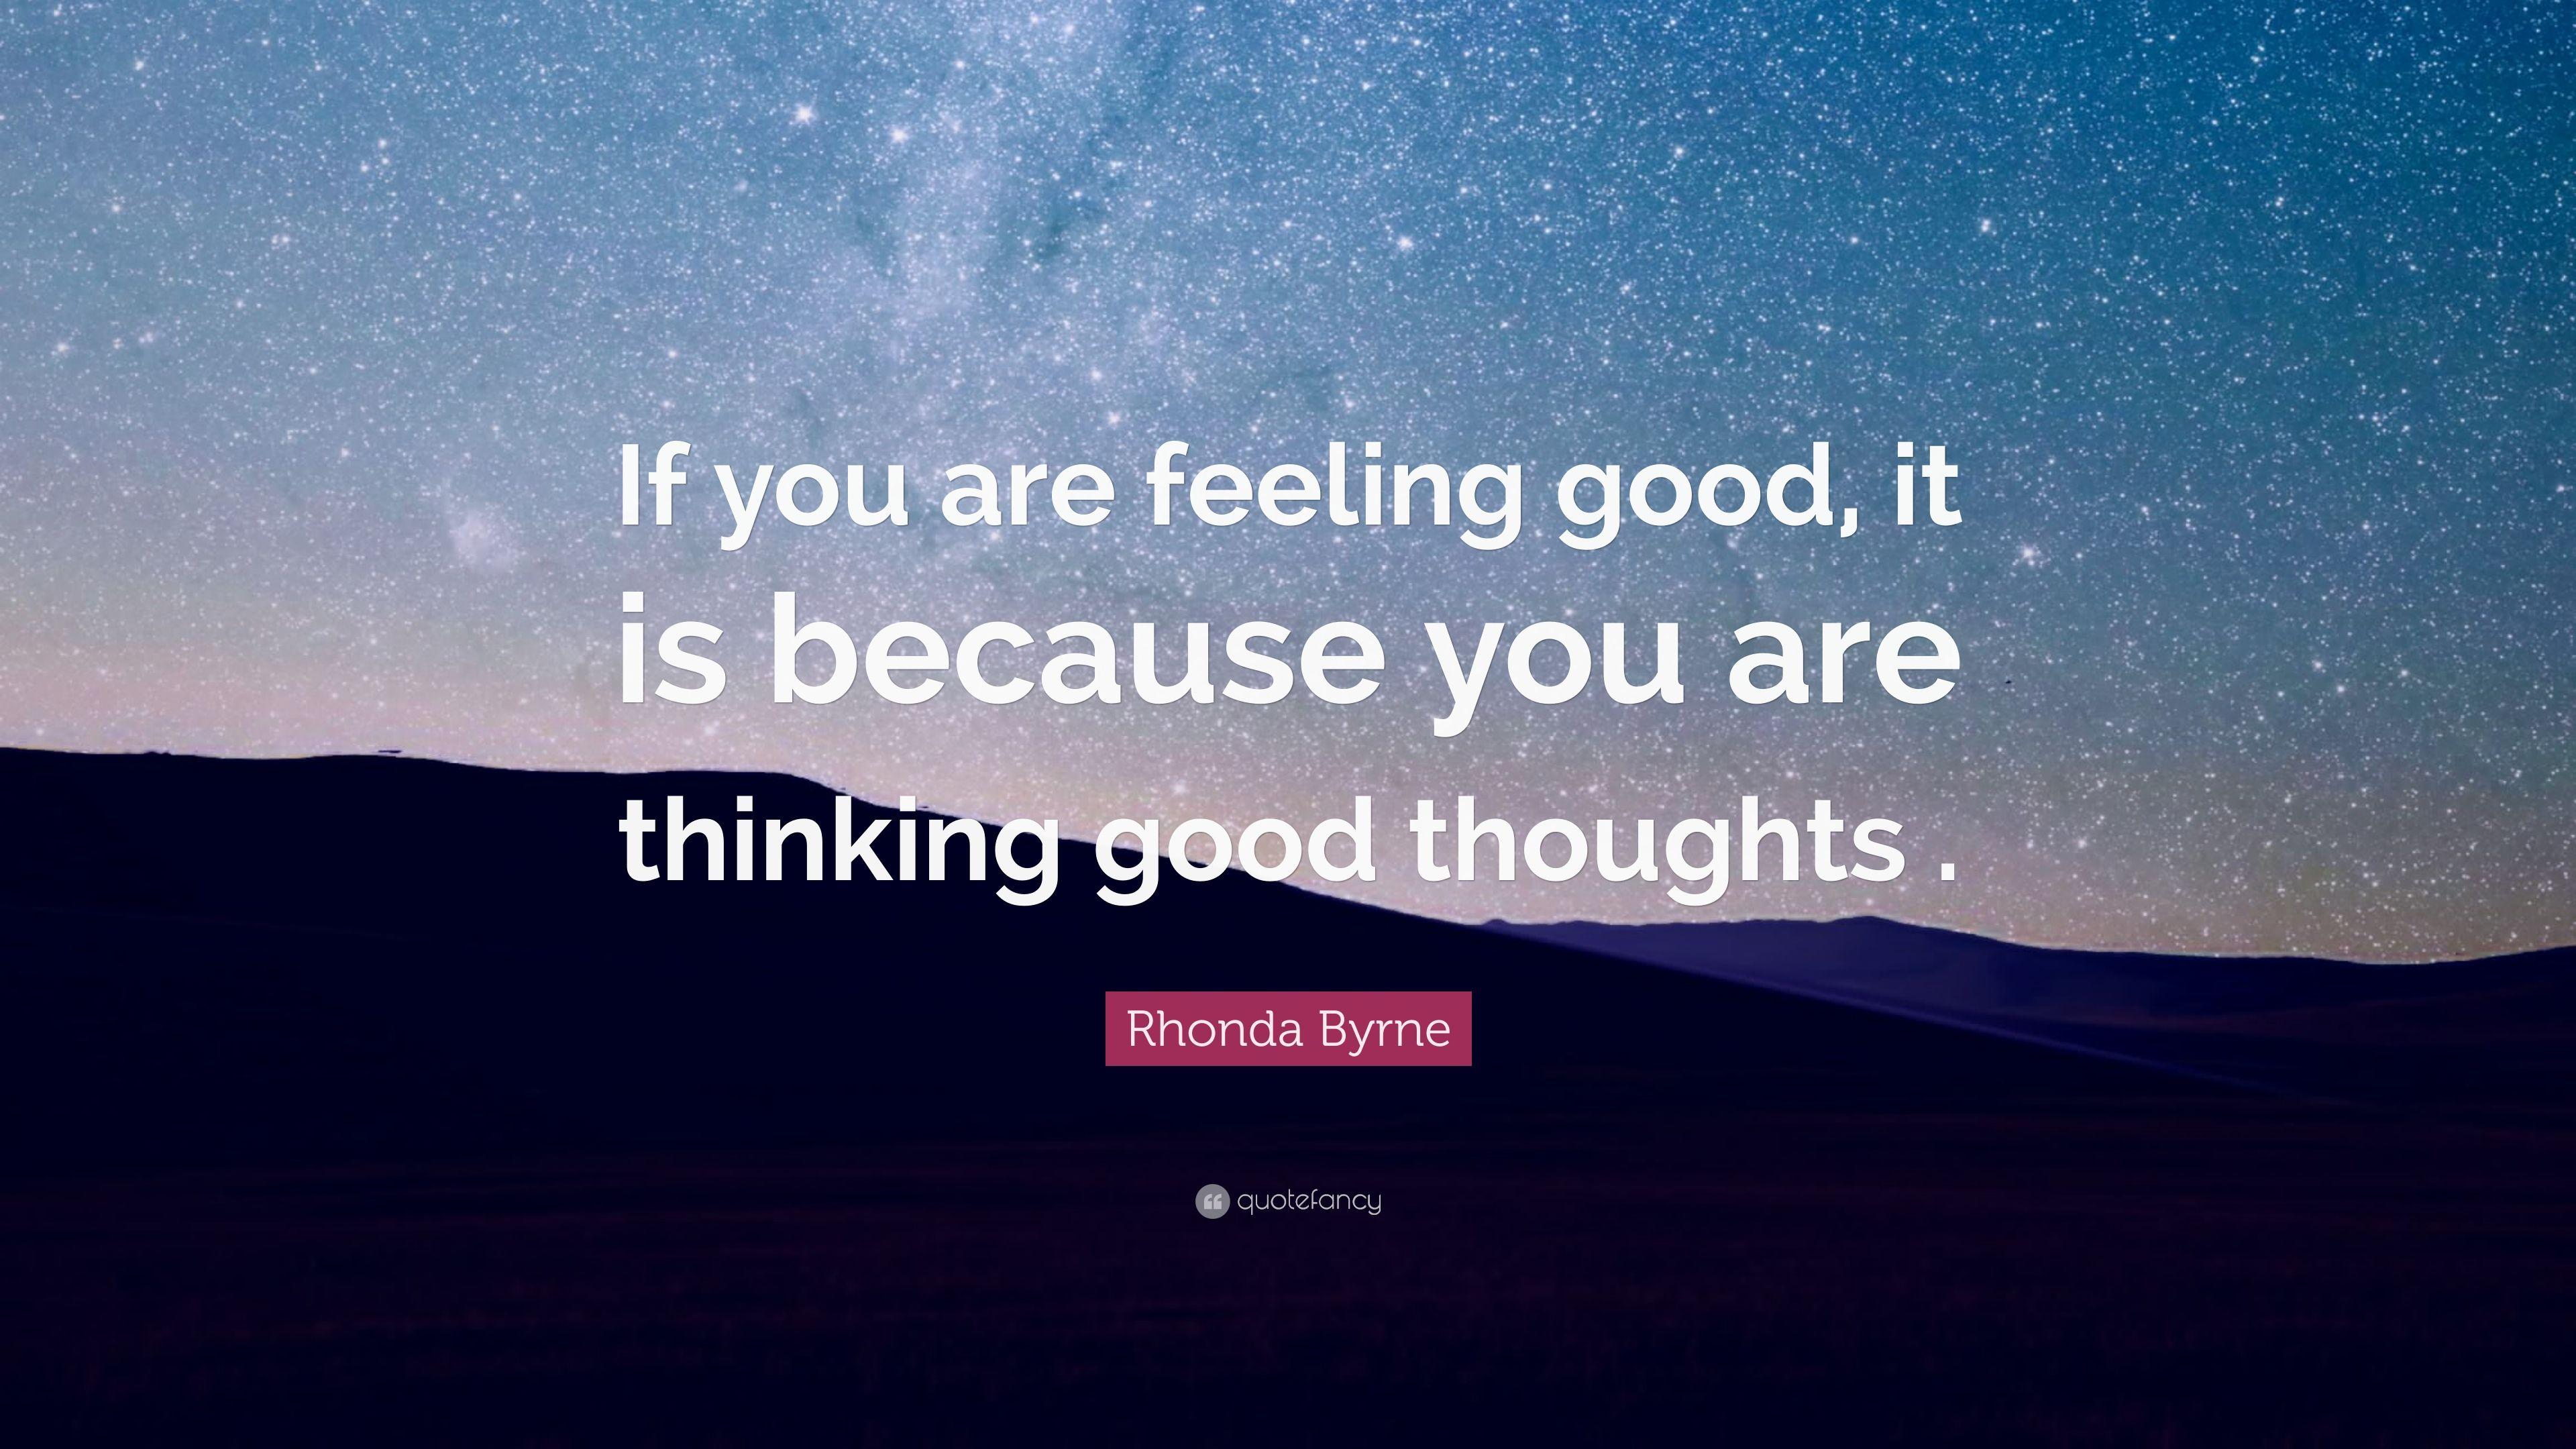 Rhonda Byrne Quote: “If you are feeling good, it is because you